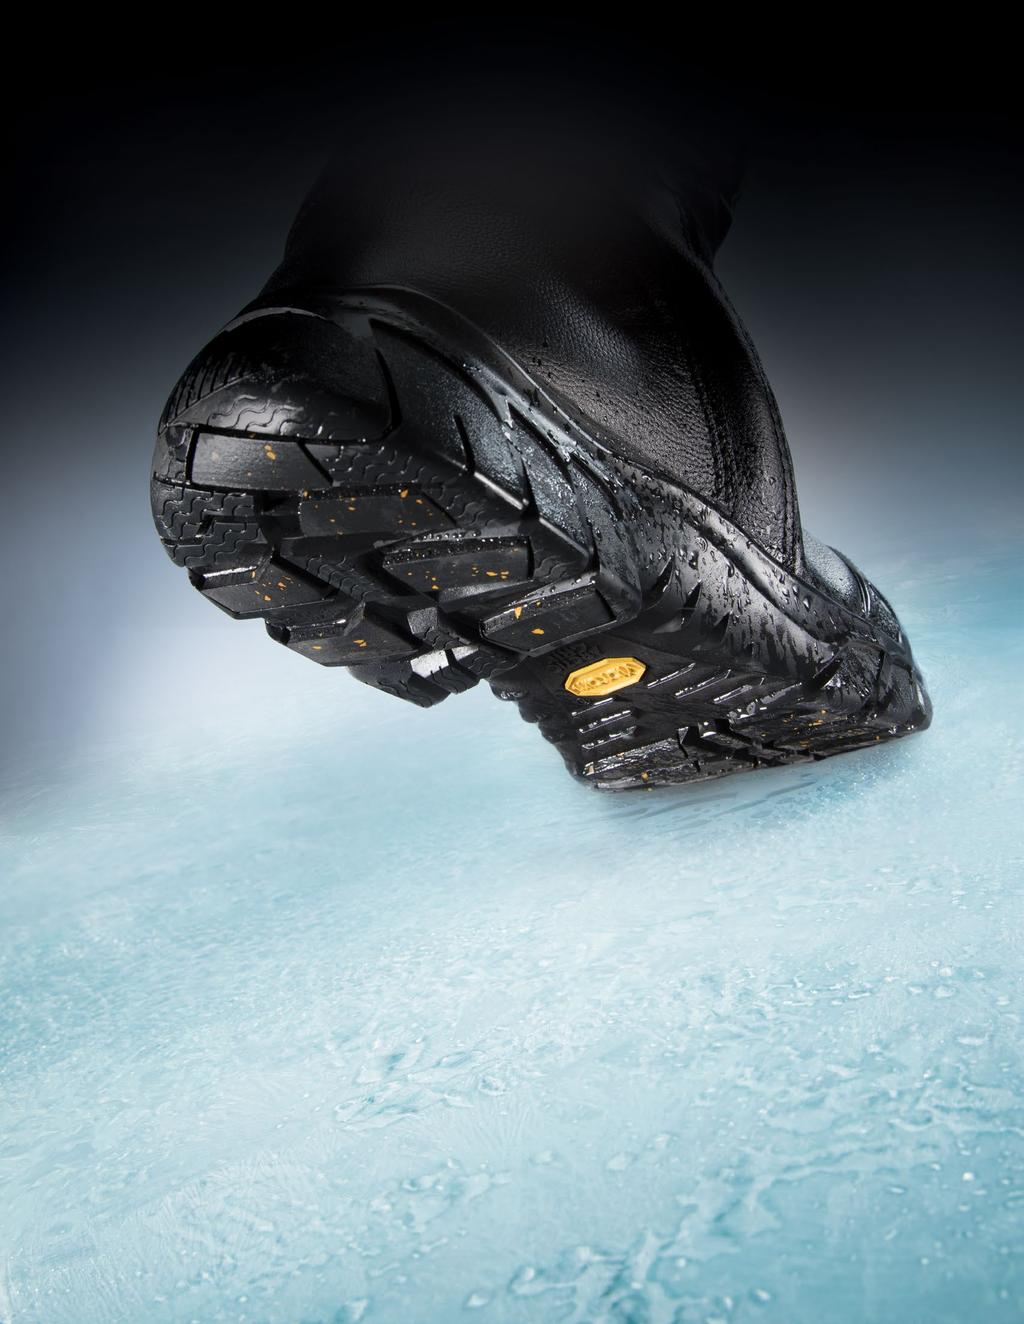 STICK IT TO WET ICE INTRODUCING VIBRAM ARCTIC GRIP PRO Deep lugs made with an advanced brush-like filler system for